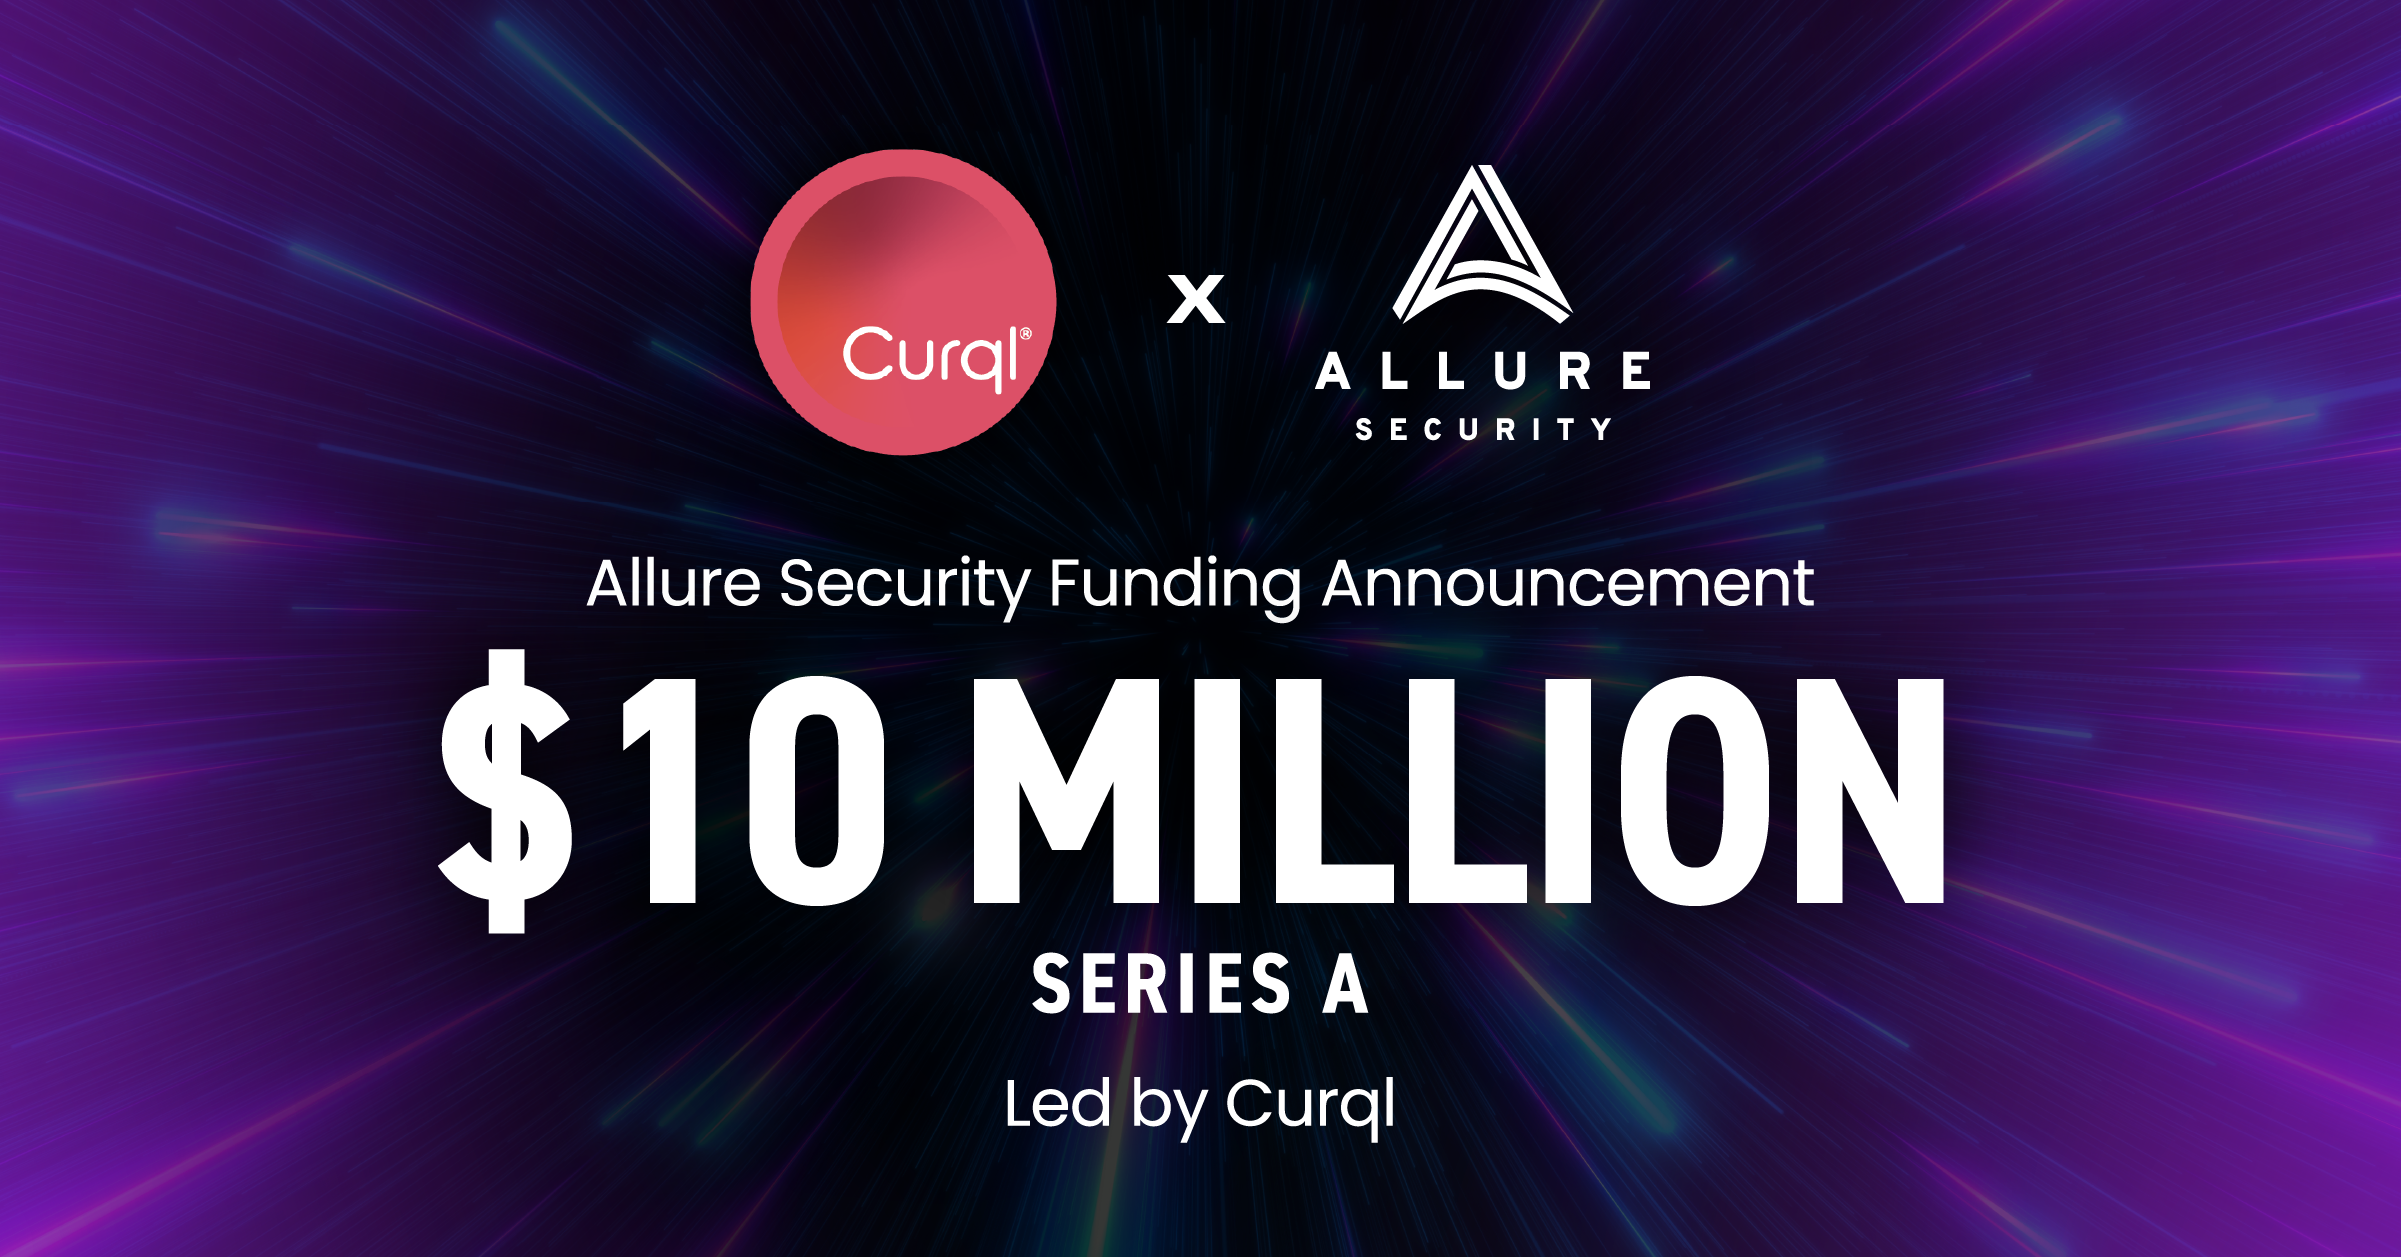 Allure Security $10 million series A led by Curql